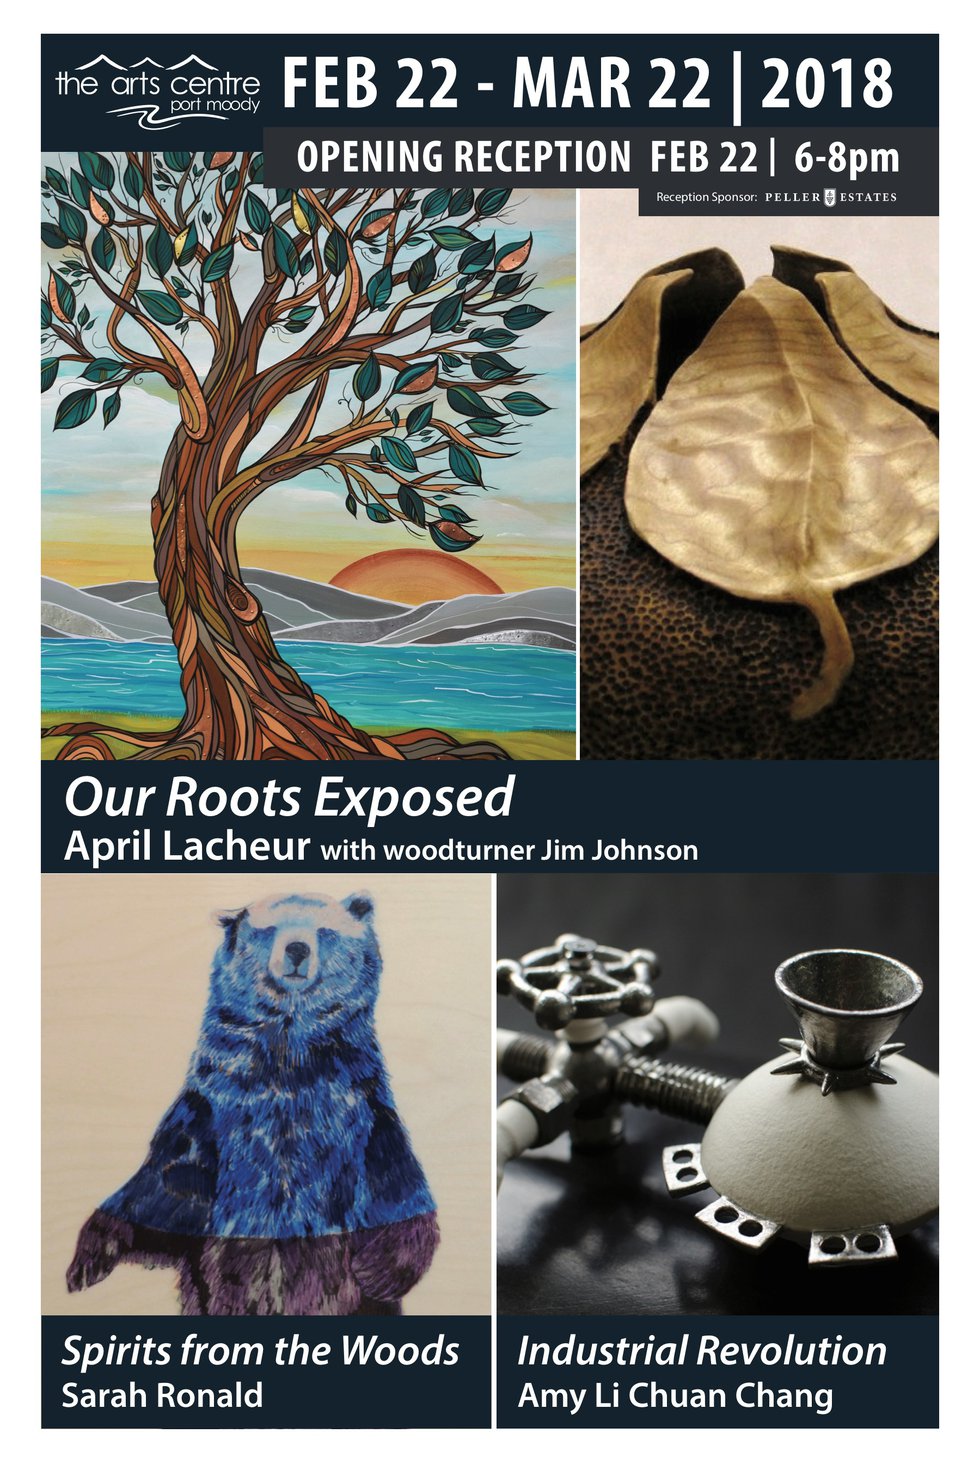 February 2018 Exhibitions Poster Image.jpg